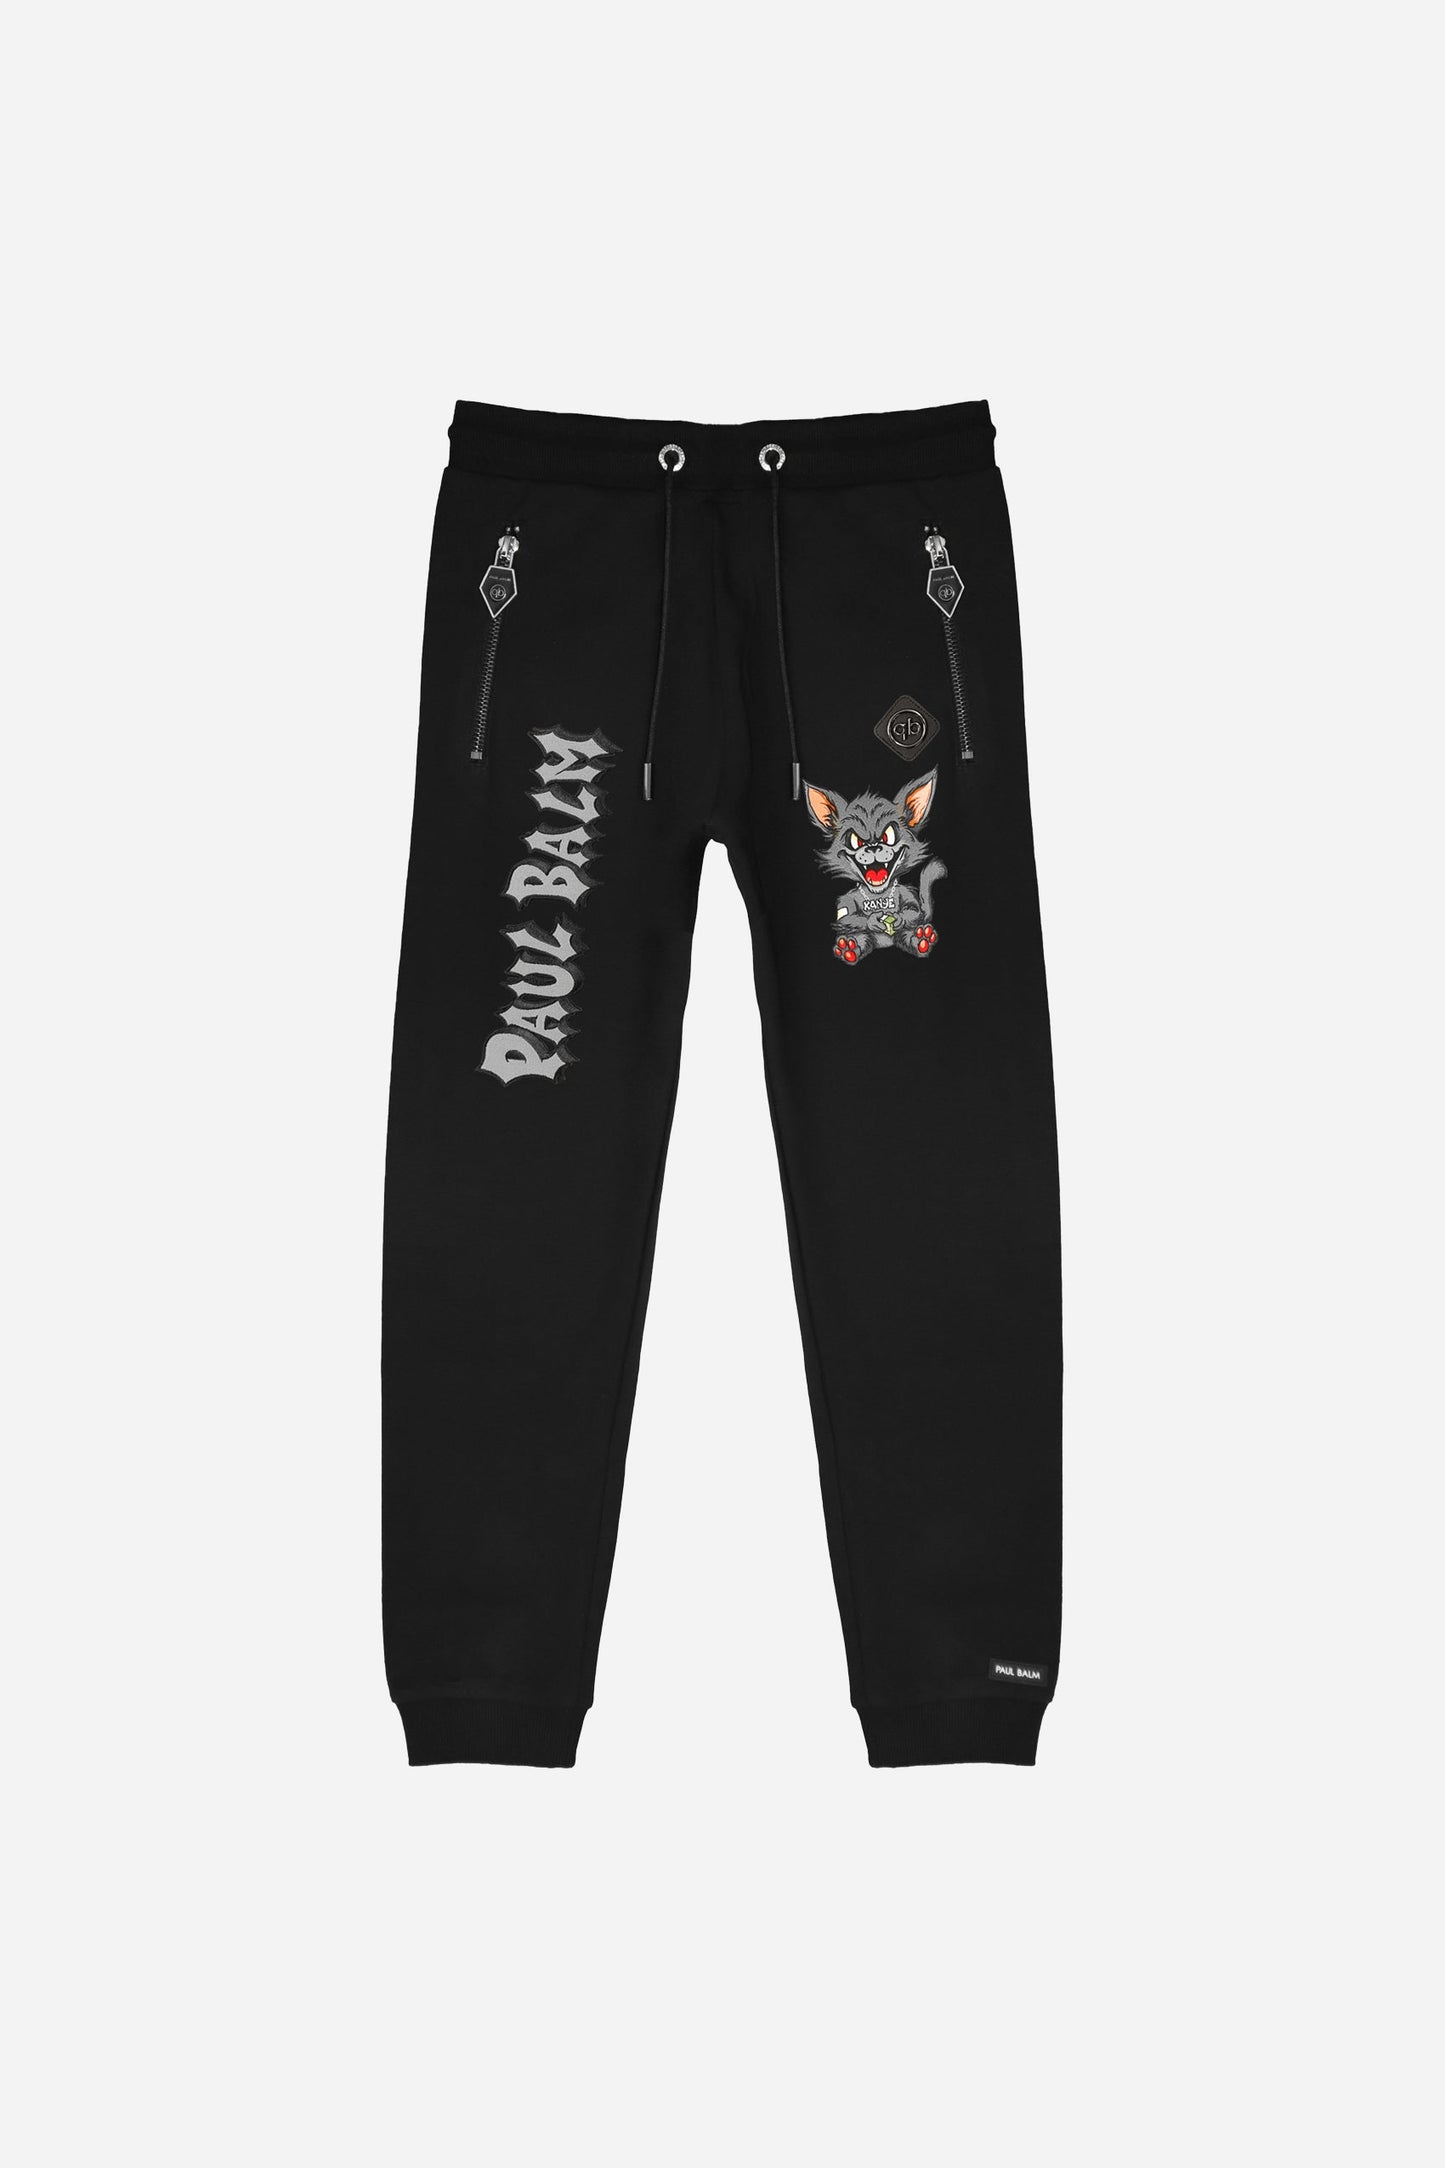 Kanye the Black Cat Embroidery Pants - Limited to 300